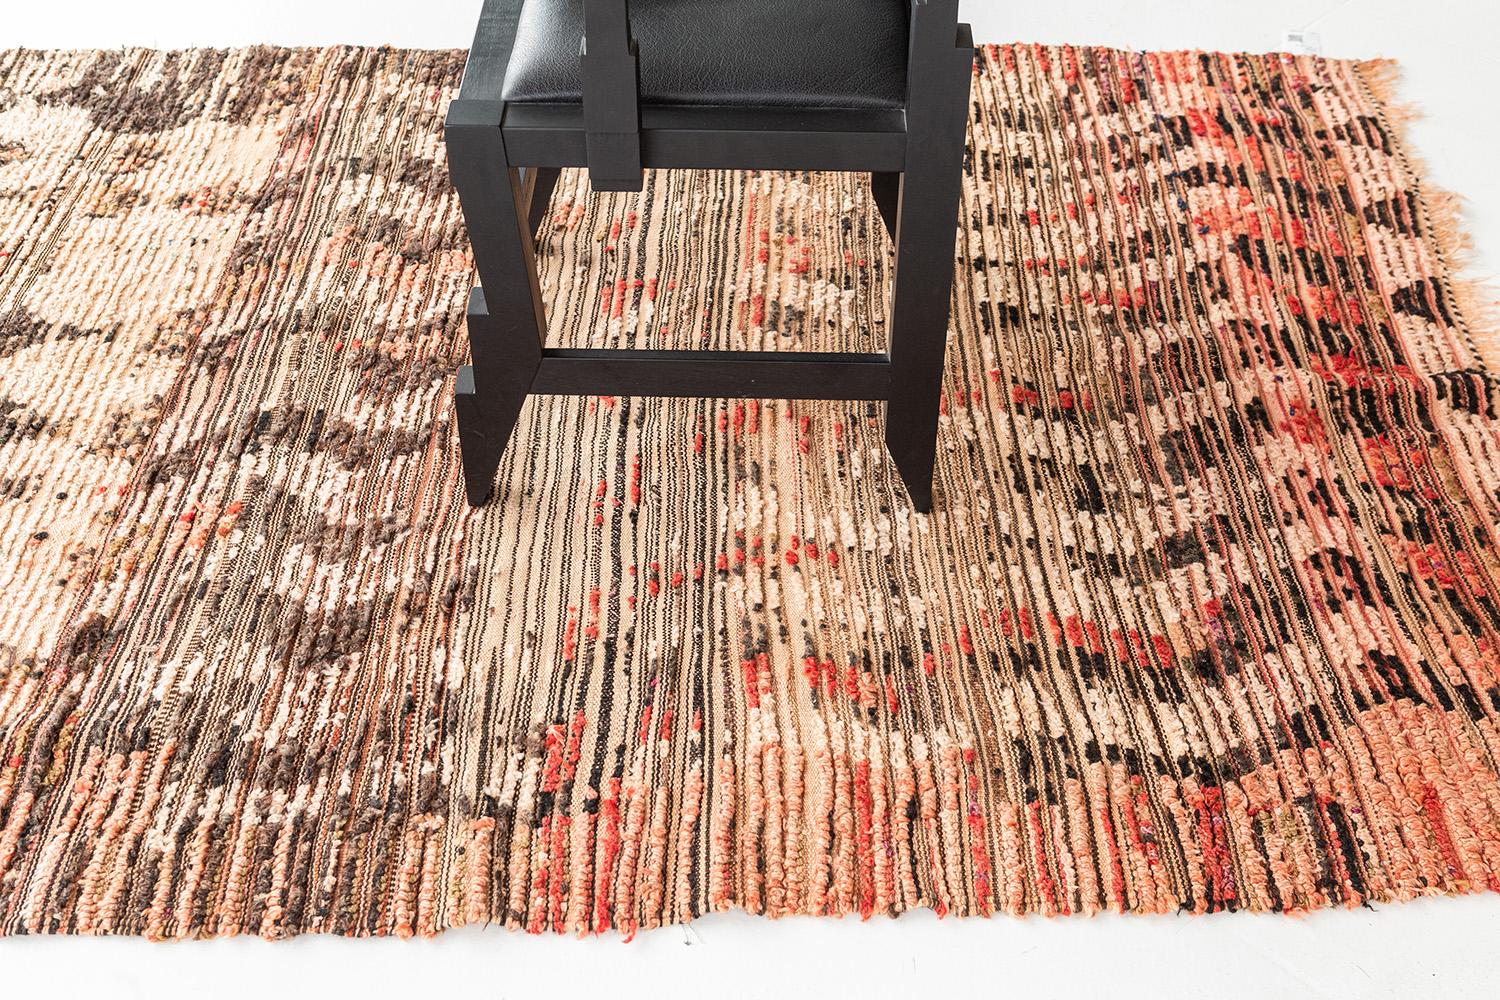 Adding this up to your collection will make your guests in awe. This vintage Berber Rug features one of the stories of Azilal Tribe handwoven in clay-tone wool. It makes it more unique when lozenges, zigzag, crisscross, and ambiguous Berber symbols